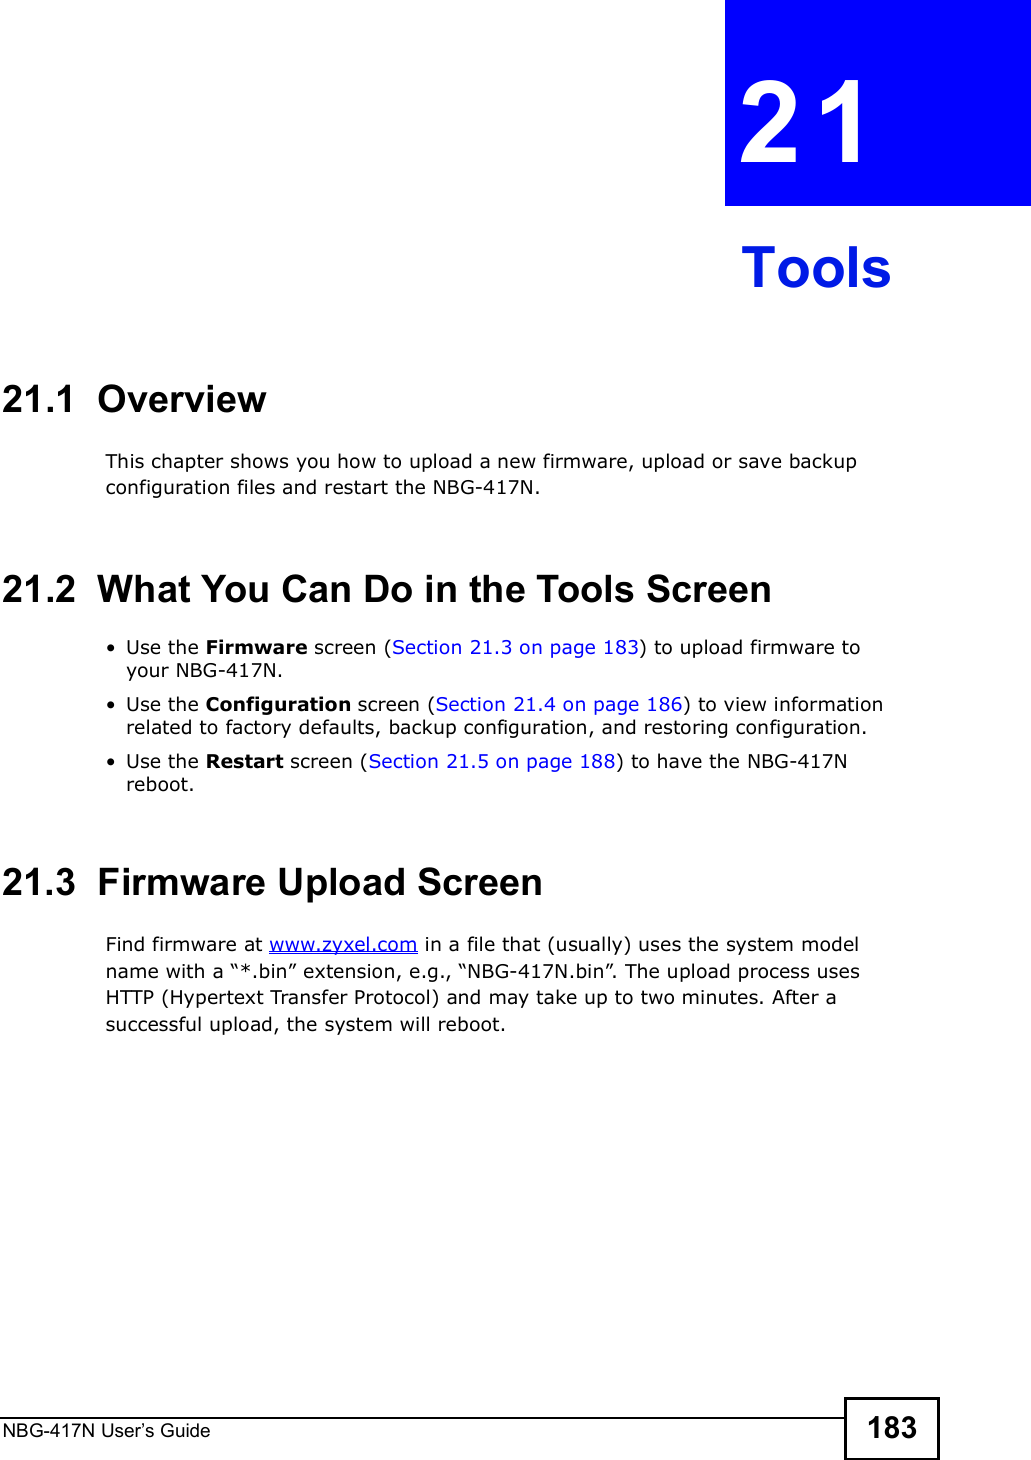 NBG-417N User s Guide 183CHAPTER  21 Tools21.1  OverviewThis chapter shows you how to upload a new firmware, upload or save backup configuration files and restart the NBG-417N.21.2  What You Can Do in the Tools Screen Use the Firmware screen (Section 21.3 on page 183) to upload firmware to your NBG-417N. Use the Configuration screen (Section 21.4 on page 186) to view information related to factory defaults, backup configuration, and restoring configuration. Use the Restart screen (Section 21.5 on page 188) to have the NBG-417N reboot.21.3  Firmware Upload ScreenFind firmware at www.zyxel.com in a file that (usually) uses the system model name with a &quot;*.bin# extension, e.g., &quot;NBG-417N.bin#. The upload process uses HTTP (Hypertext Transfer Protocol) and may take up to two minutes. After a successful upload, the system will reboot.